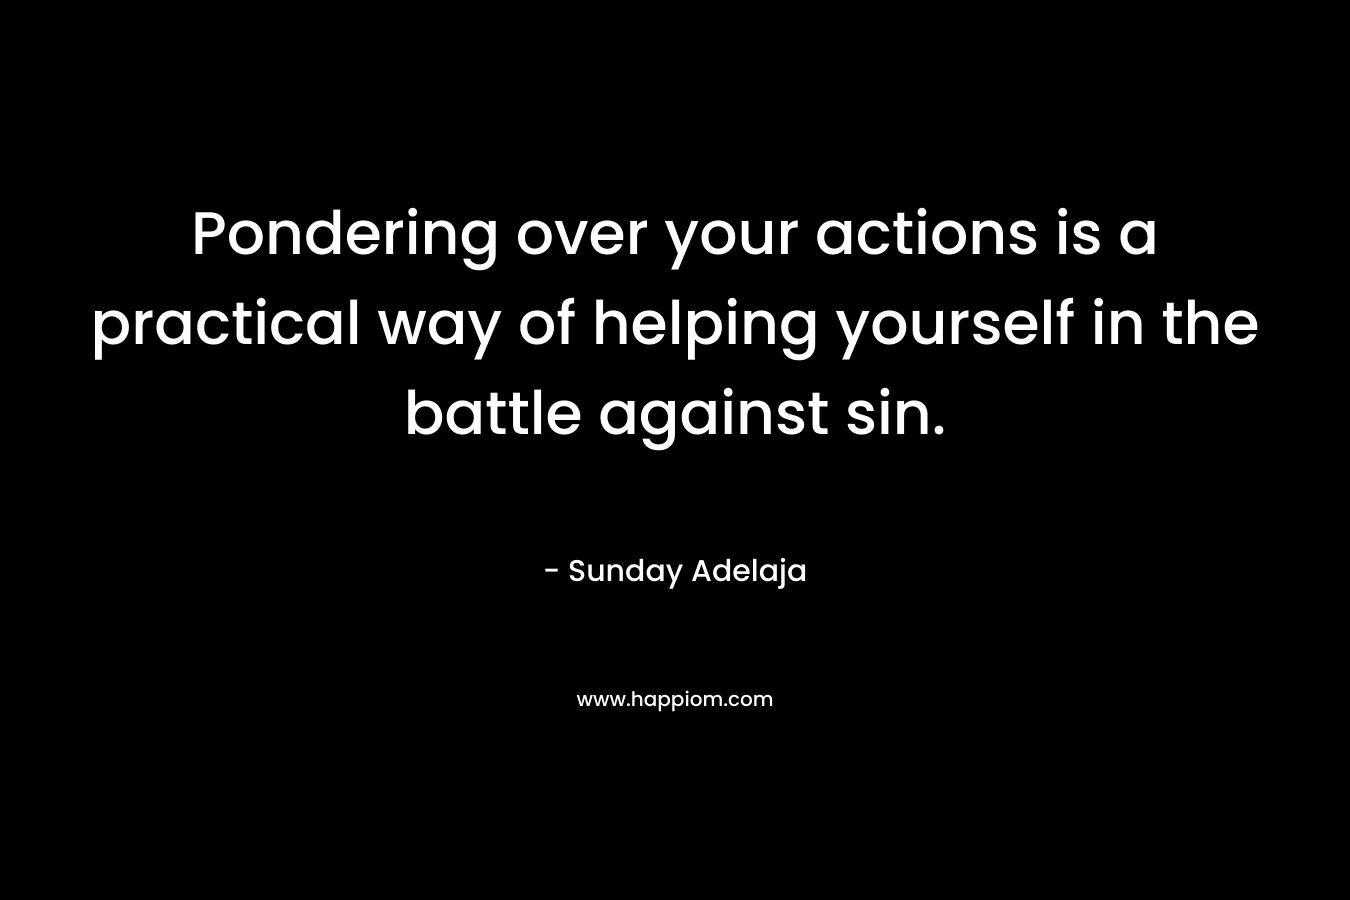 Pondering over your actions is a practical way of helping yourself in the battle against sin. – Sunday Adelaja